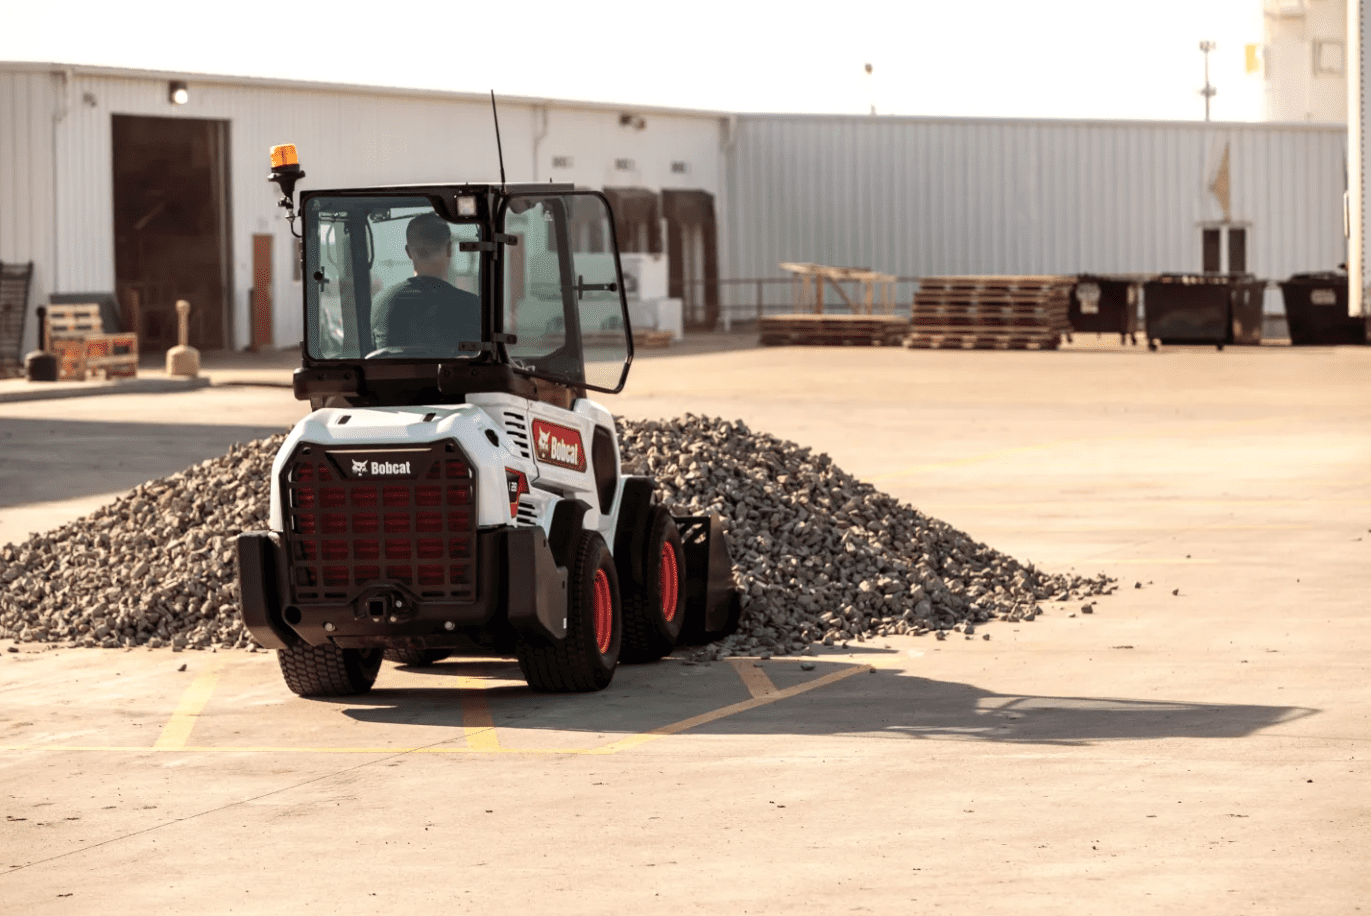 Browse Specs and more for the L28 Small Articulated Loader - White Star Machinery